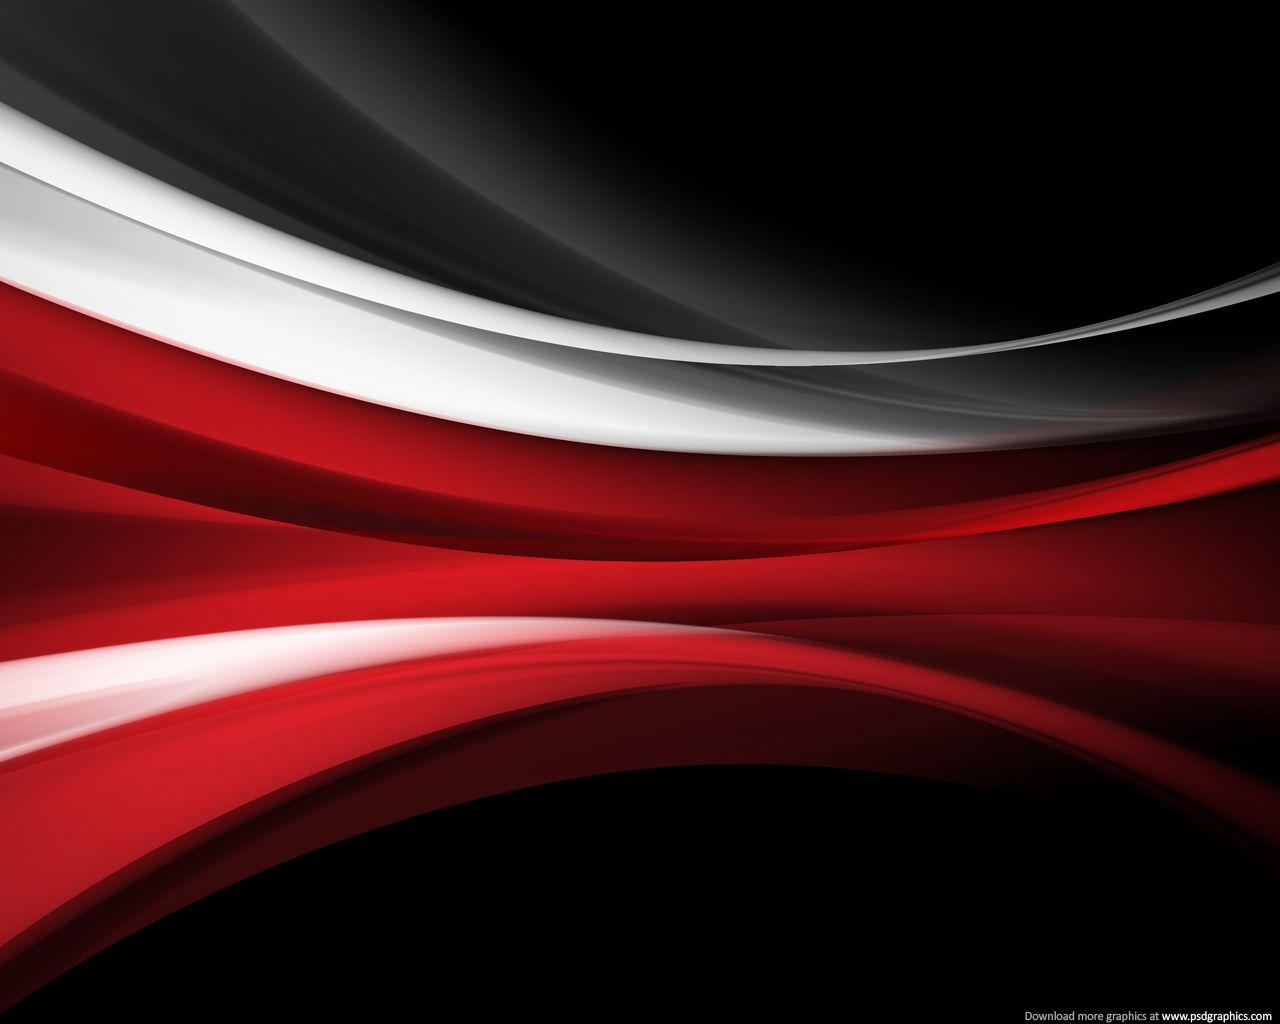 Black and White On Red Background Logo - Black White And Red Backgrounds - WallpaperSafari